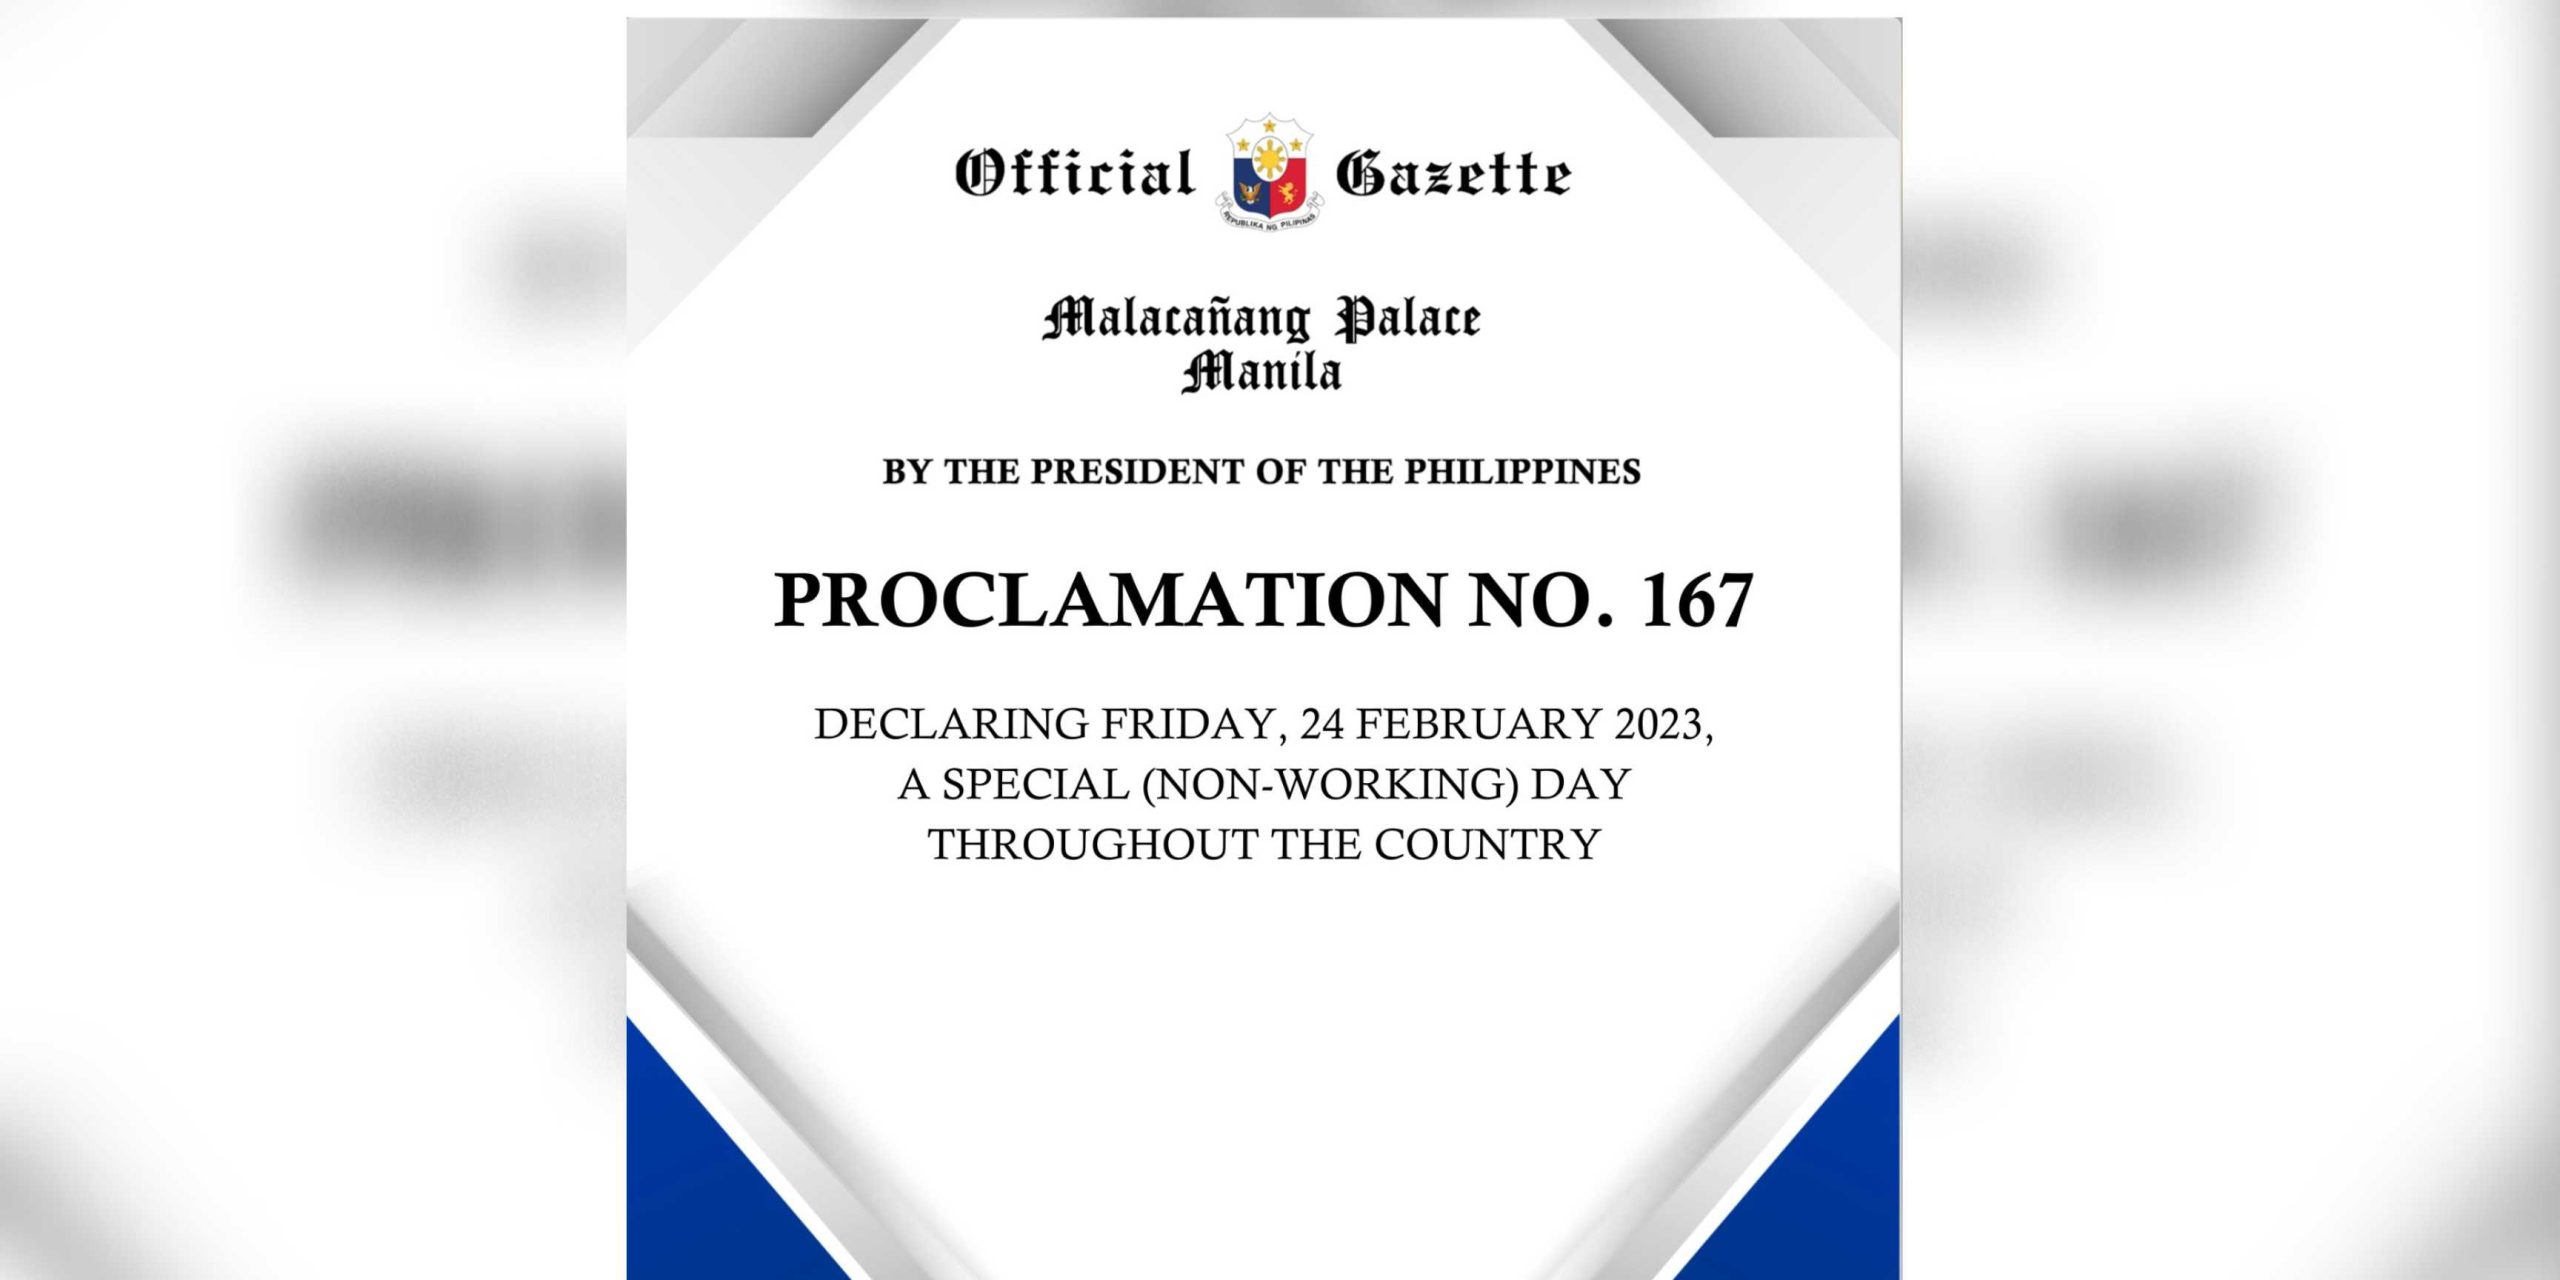 February 24 declared Special NonWorking Holiday in PH, says Malacañang